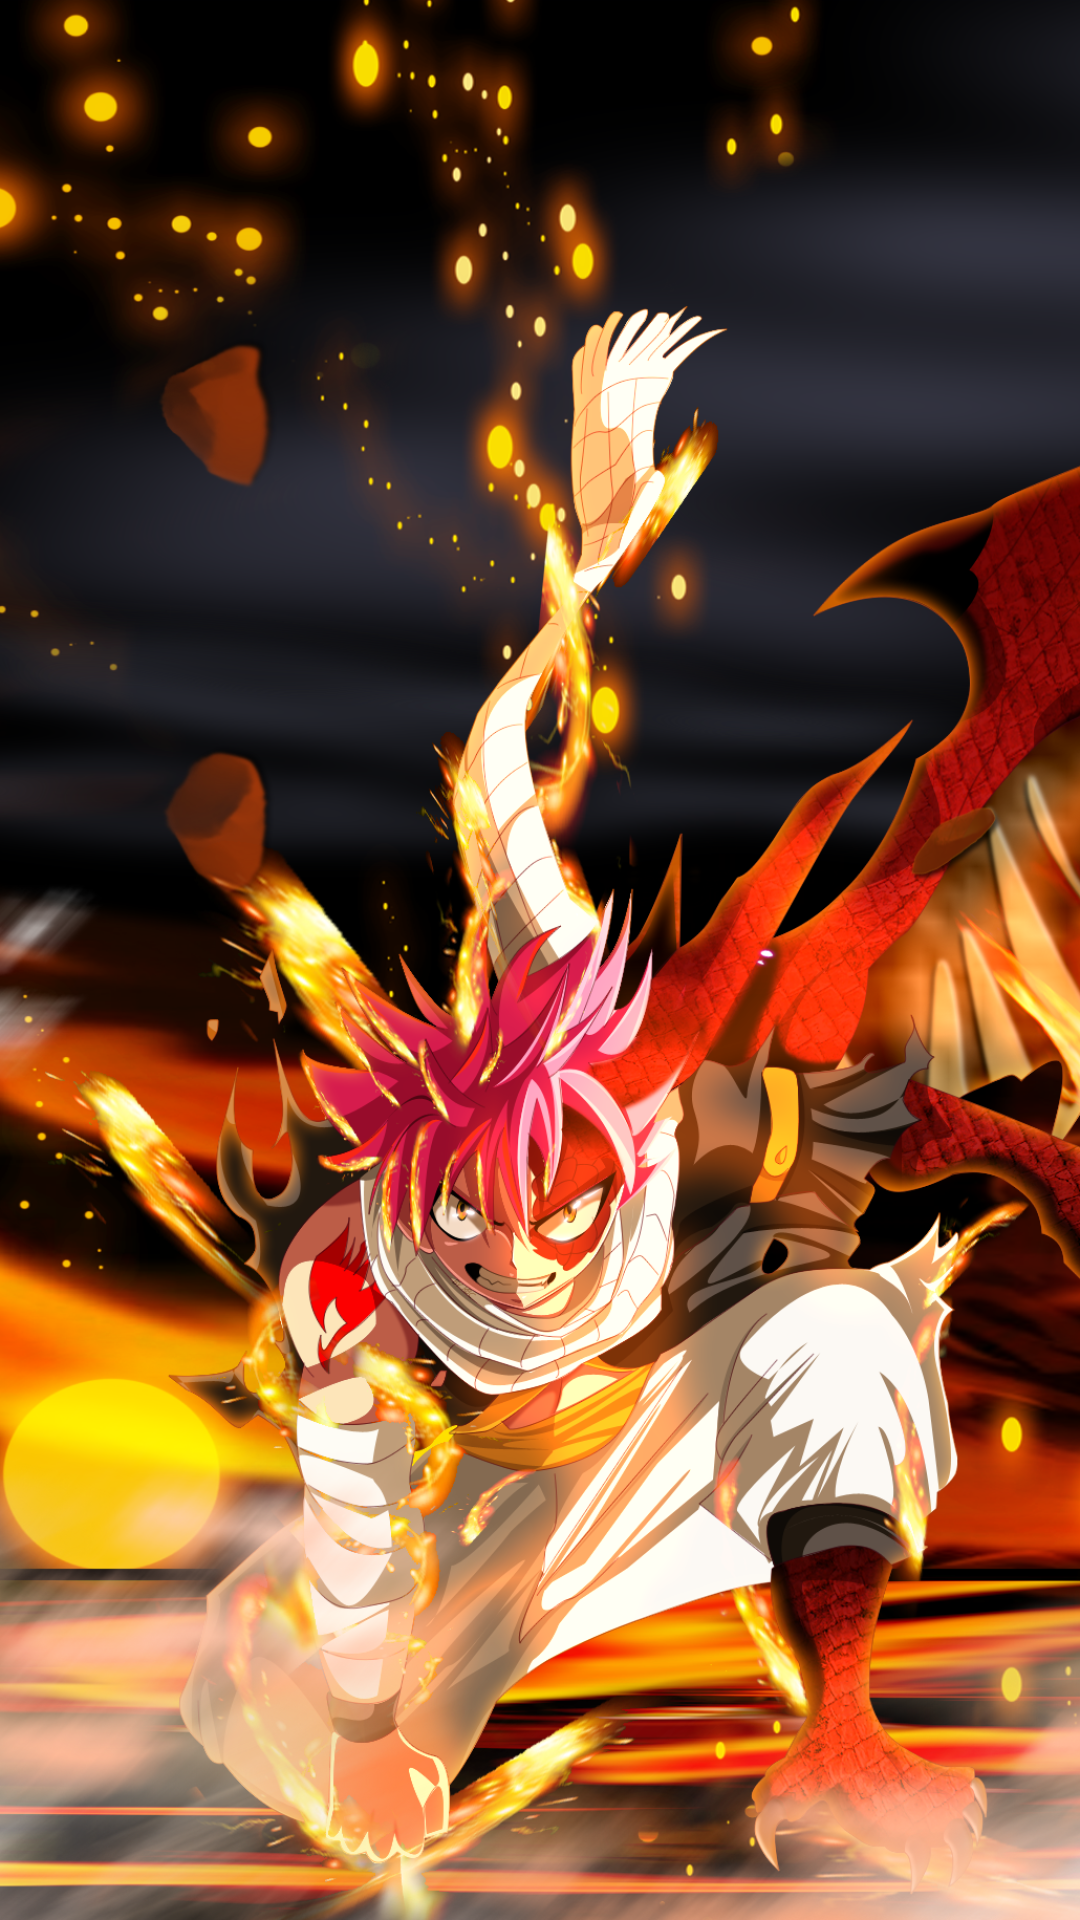 Fairy Tail Hd Wallpaper For Iphone - HD Wallpaper 